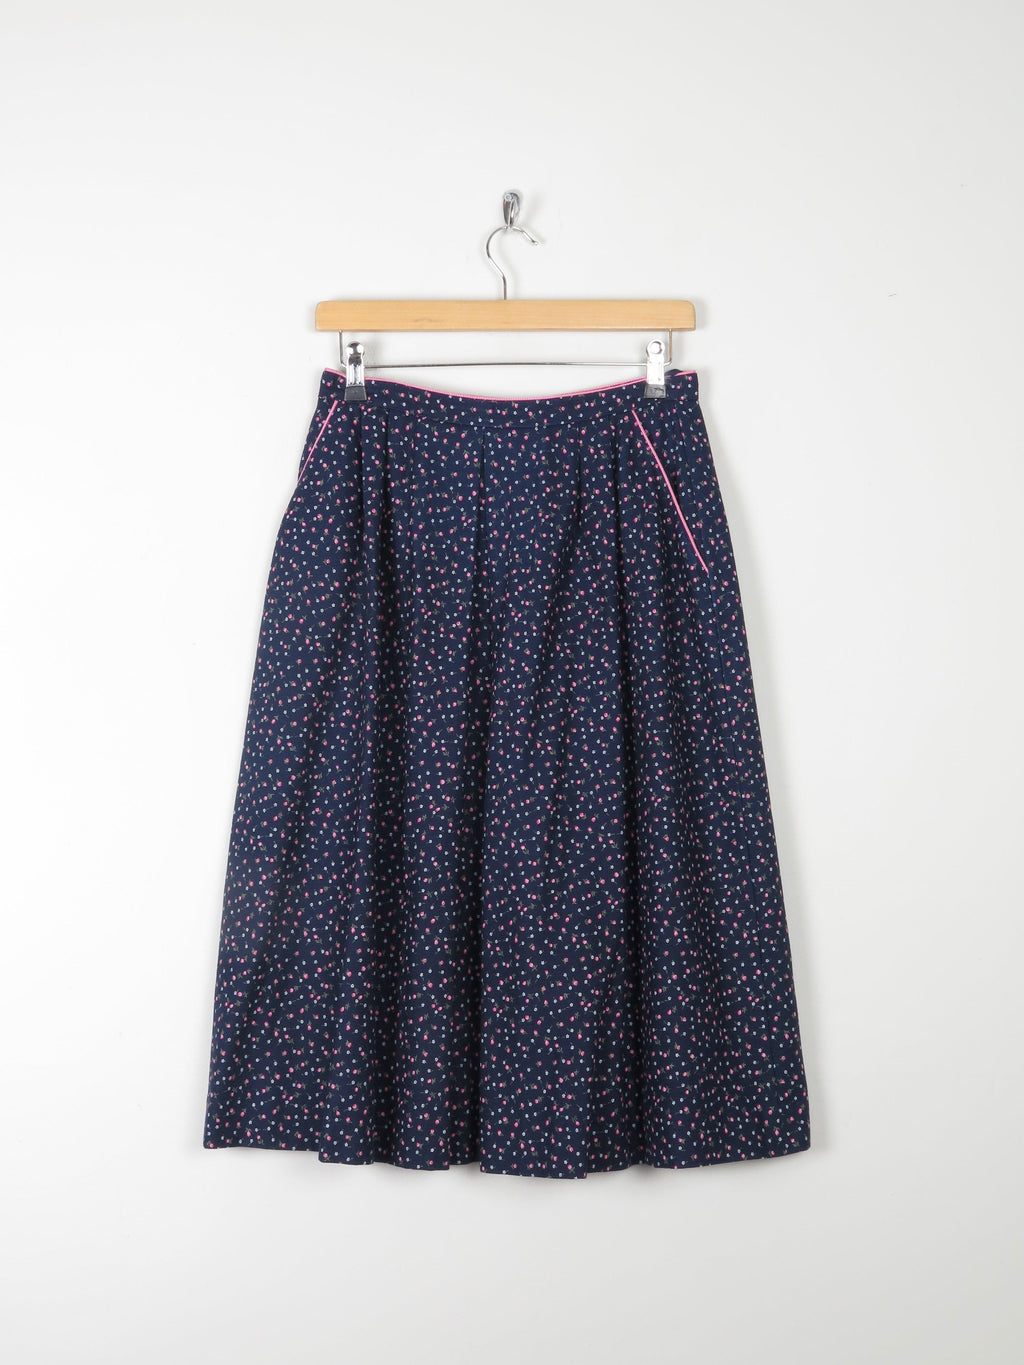 Navy Floral Vintage Prairie Skirt With Pockets 28" 8/10 - The Harlequin